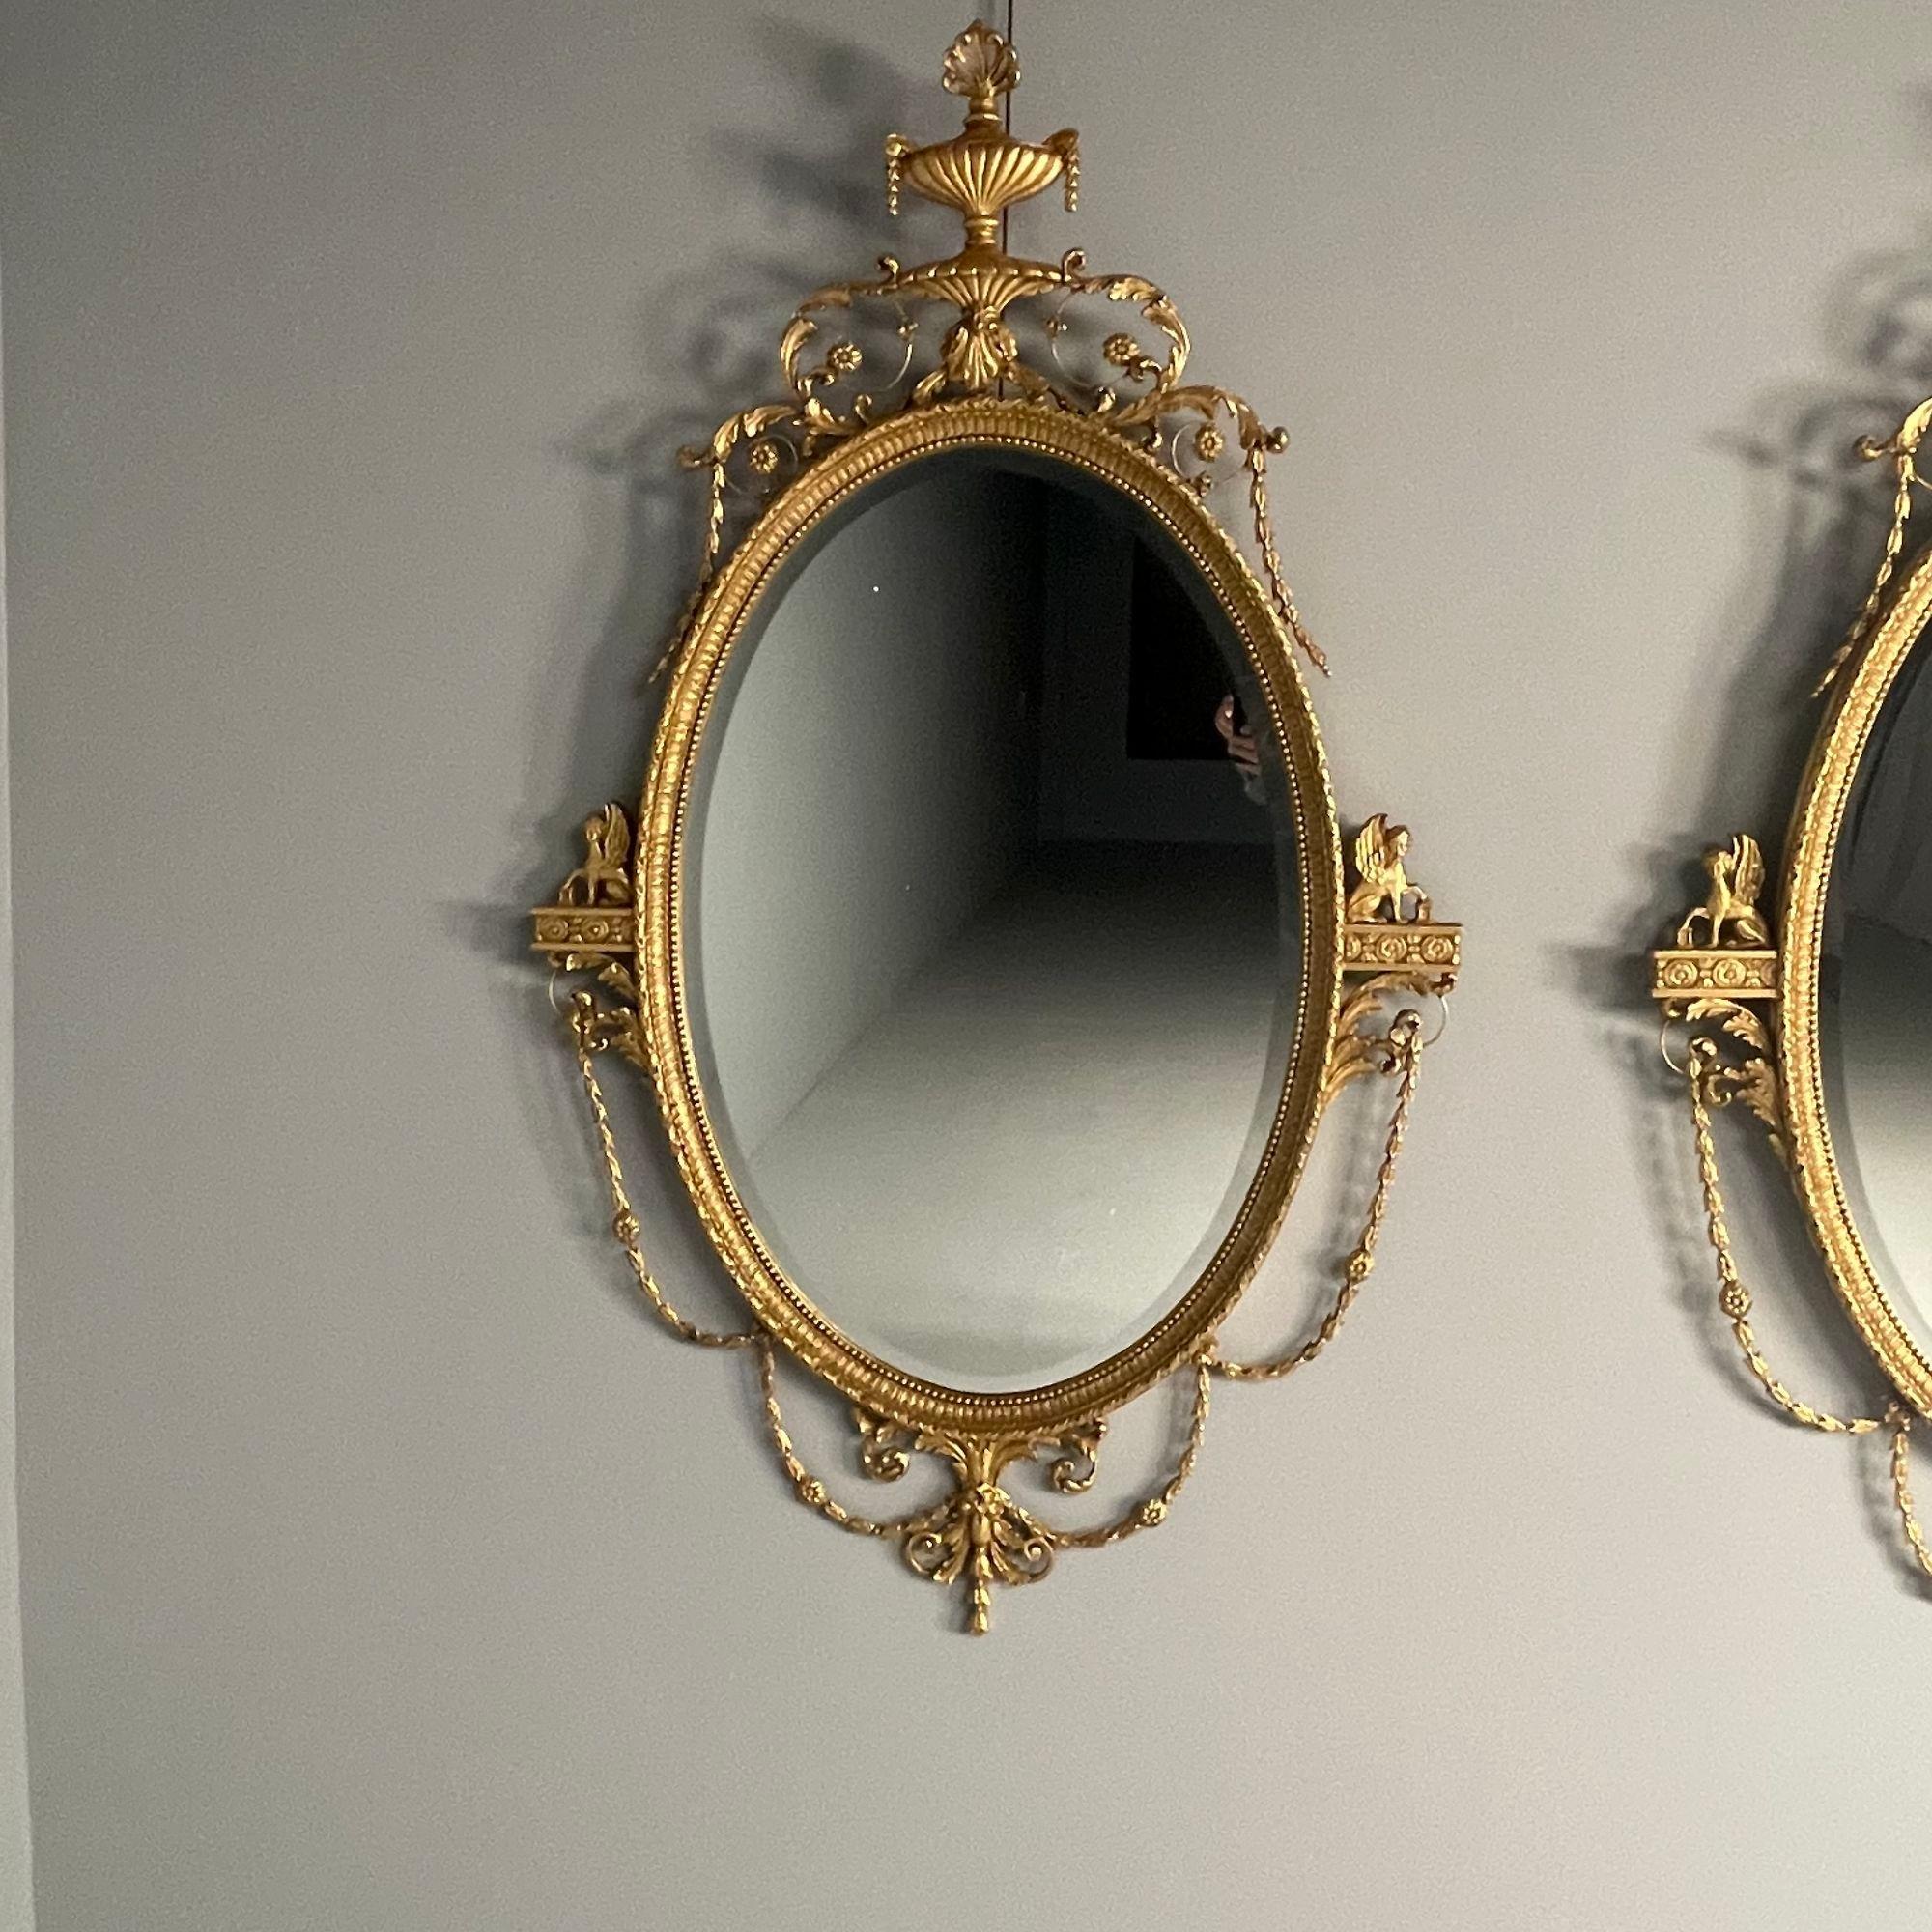 Friedman Brothers, English Regency Style, Oval Wall Mirrors, Giltwood, Gesso For Sale 2